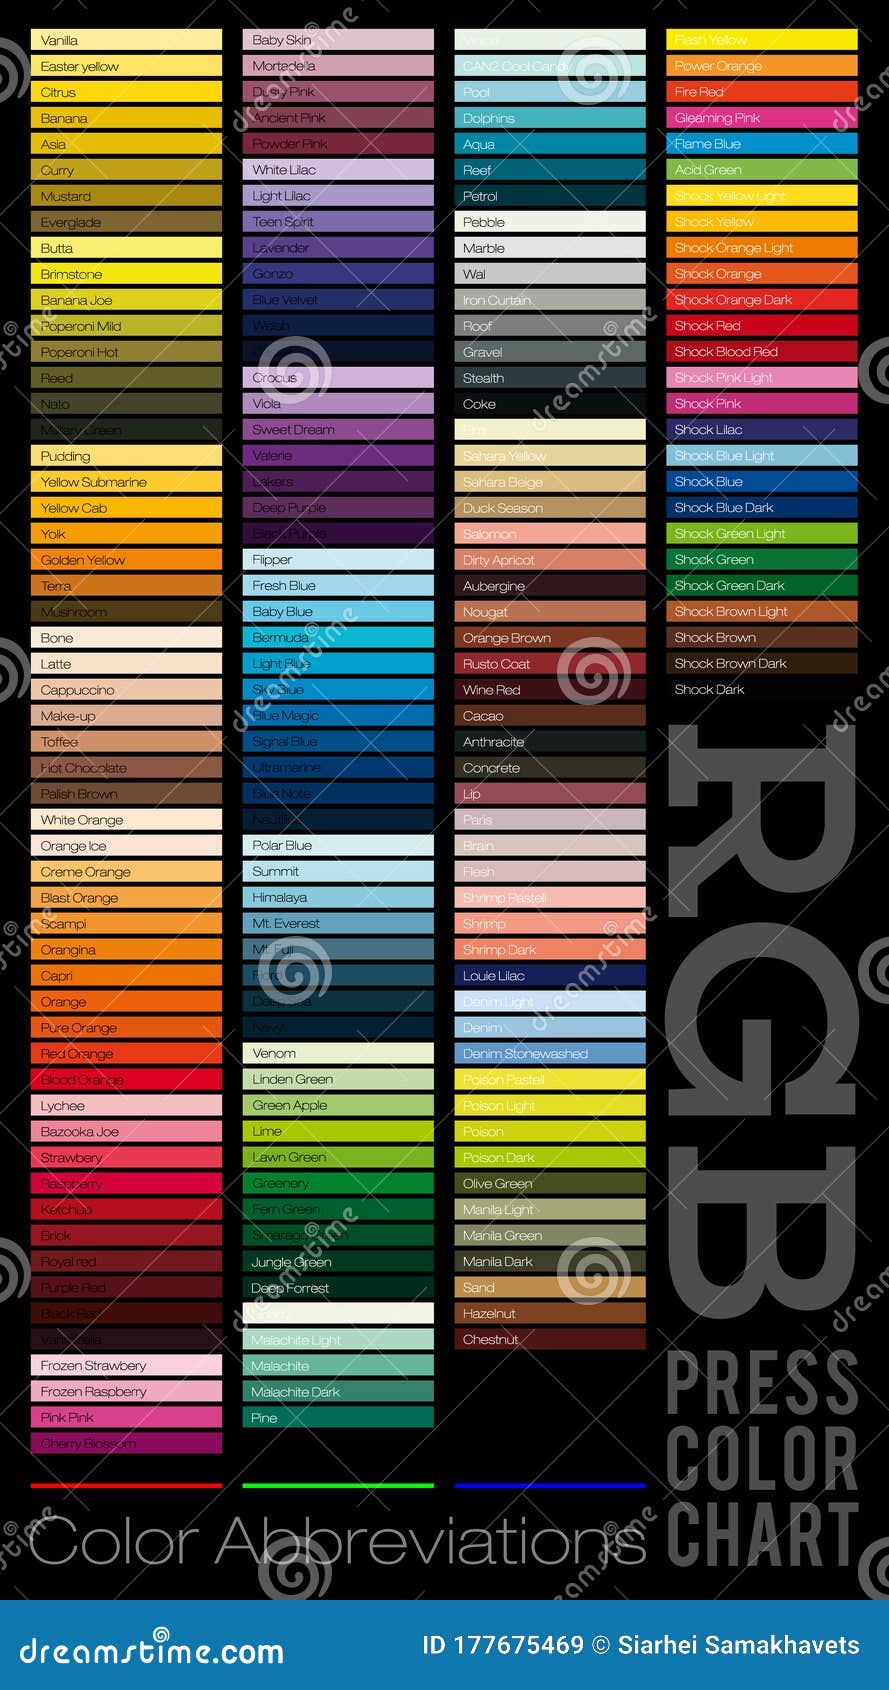 Color palette guide for print book Royalty Free Vector Image